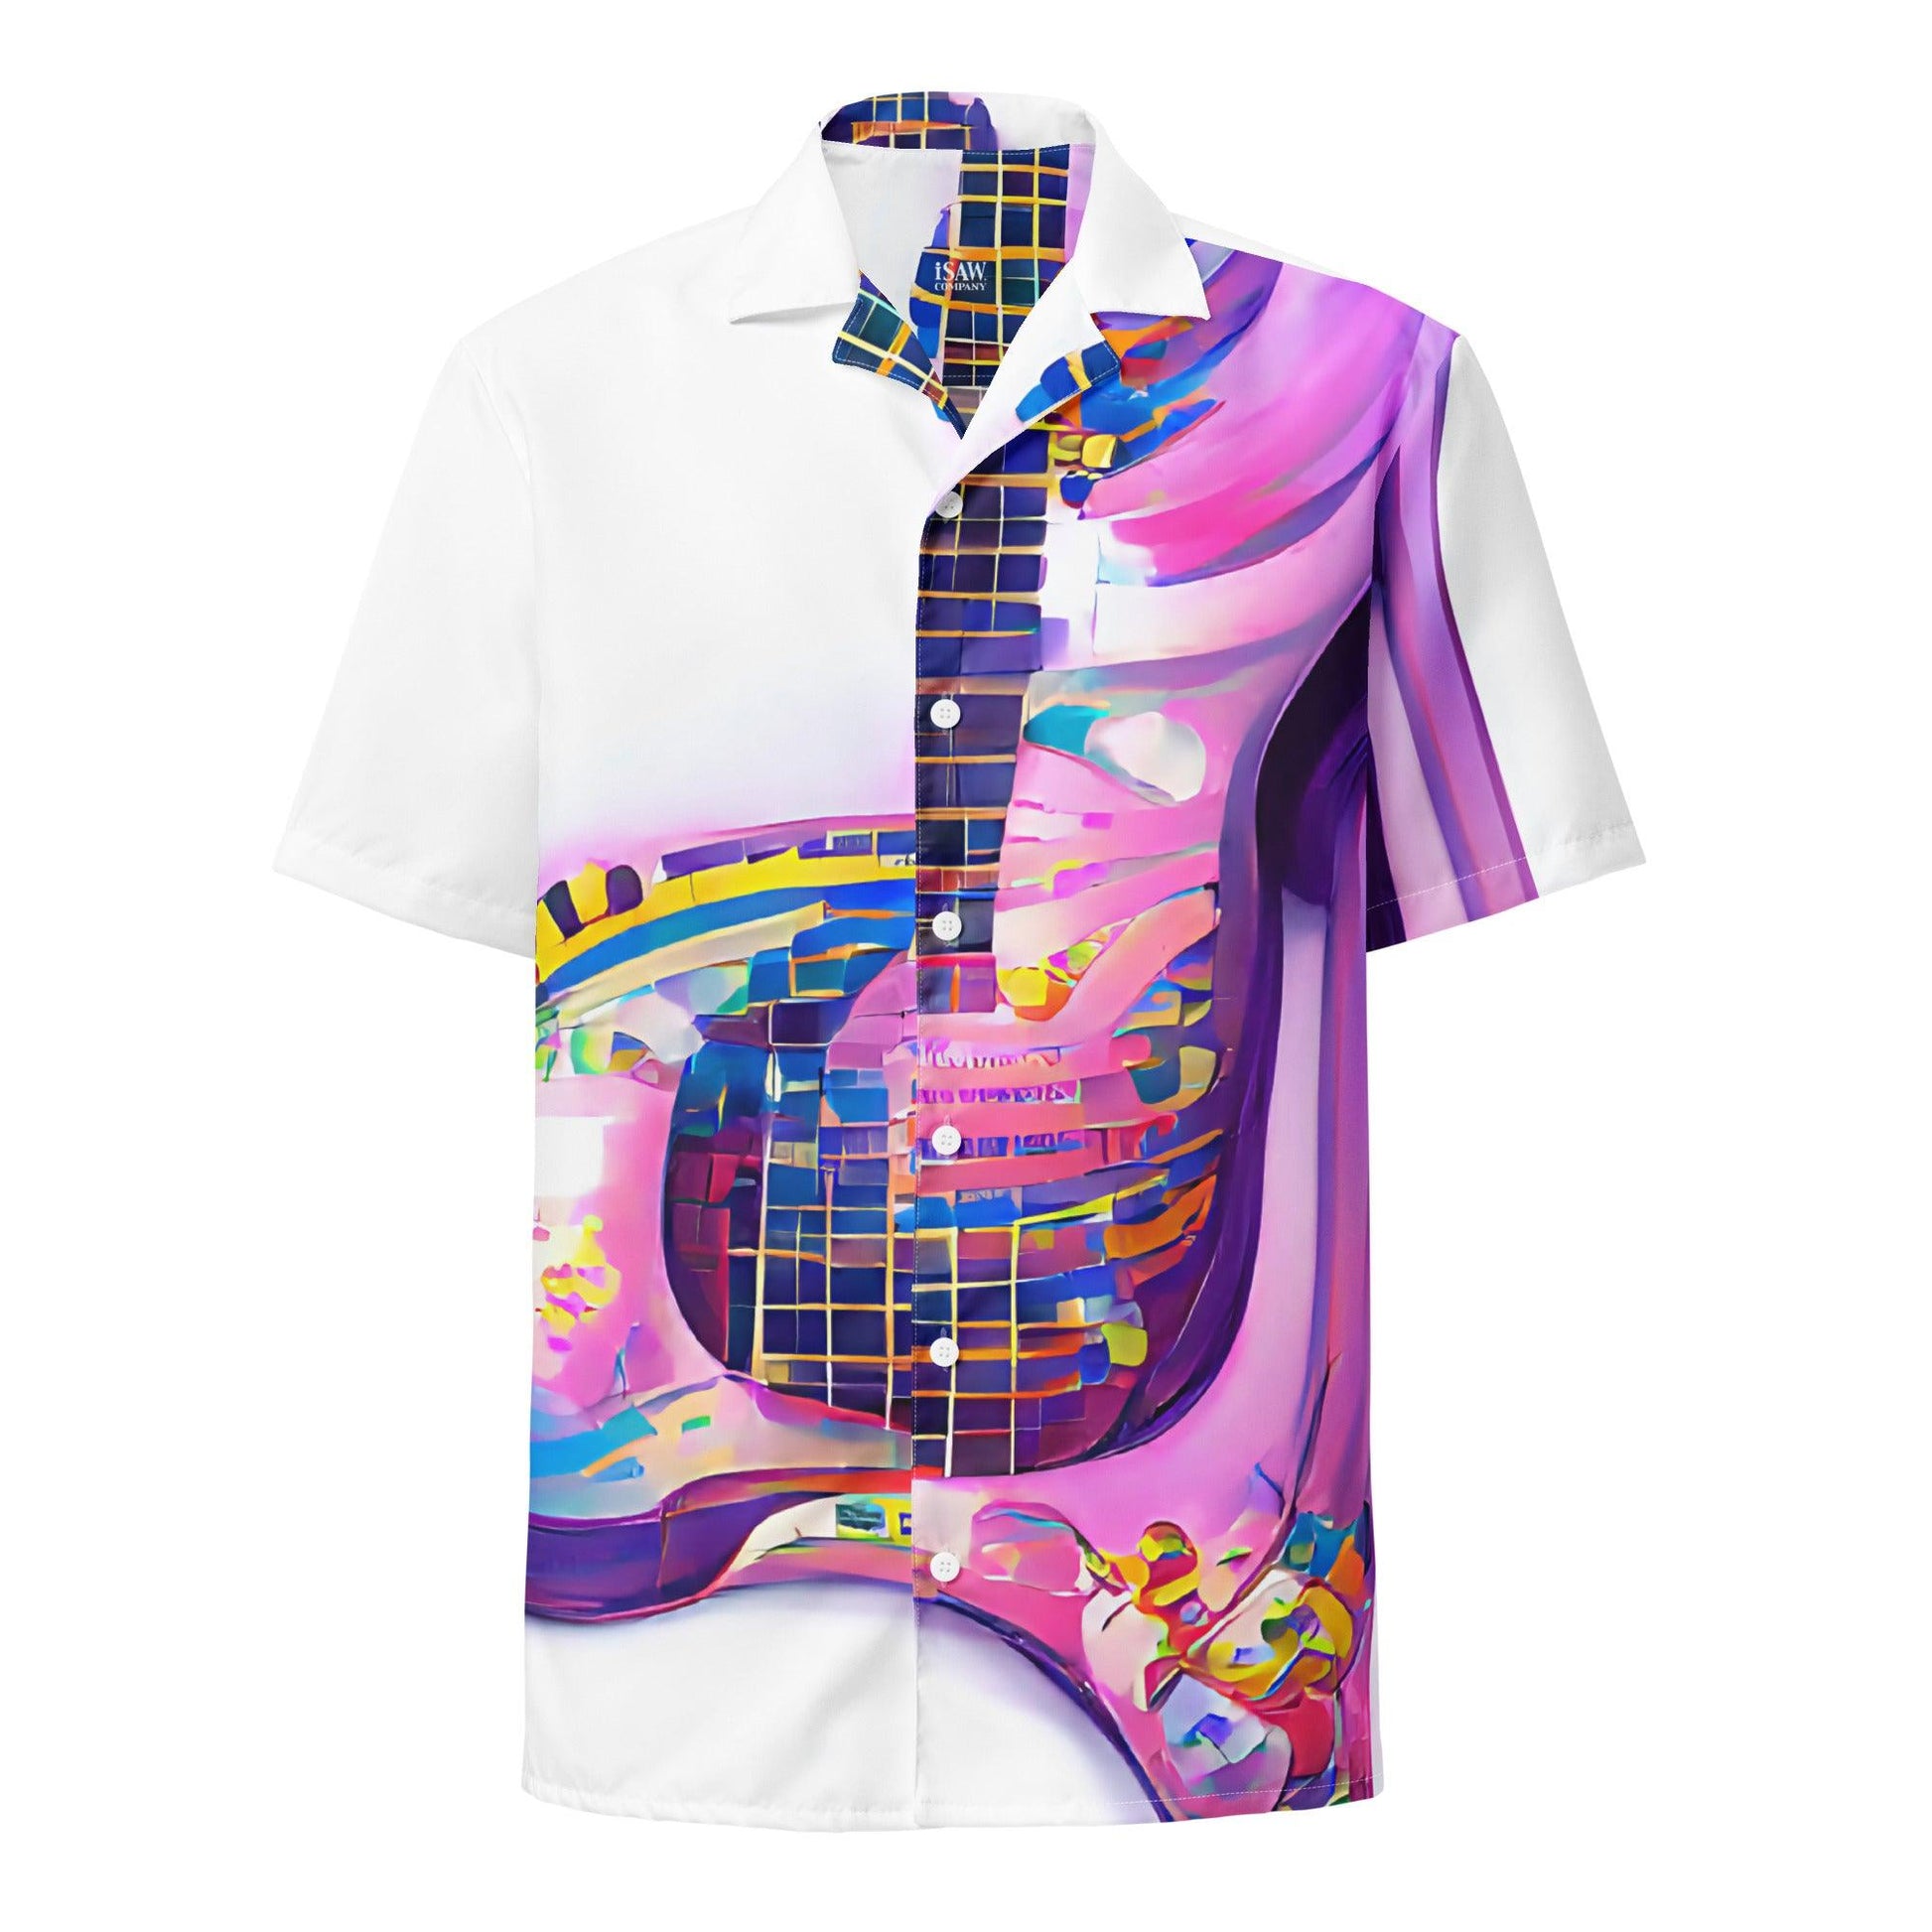 Hippie Guitar - Unisex Button Shirt - iSAW Company